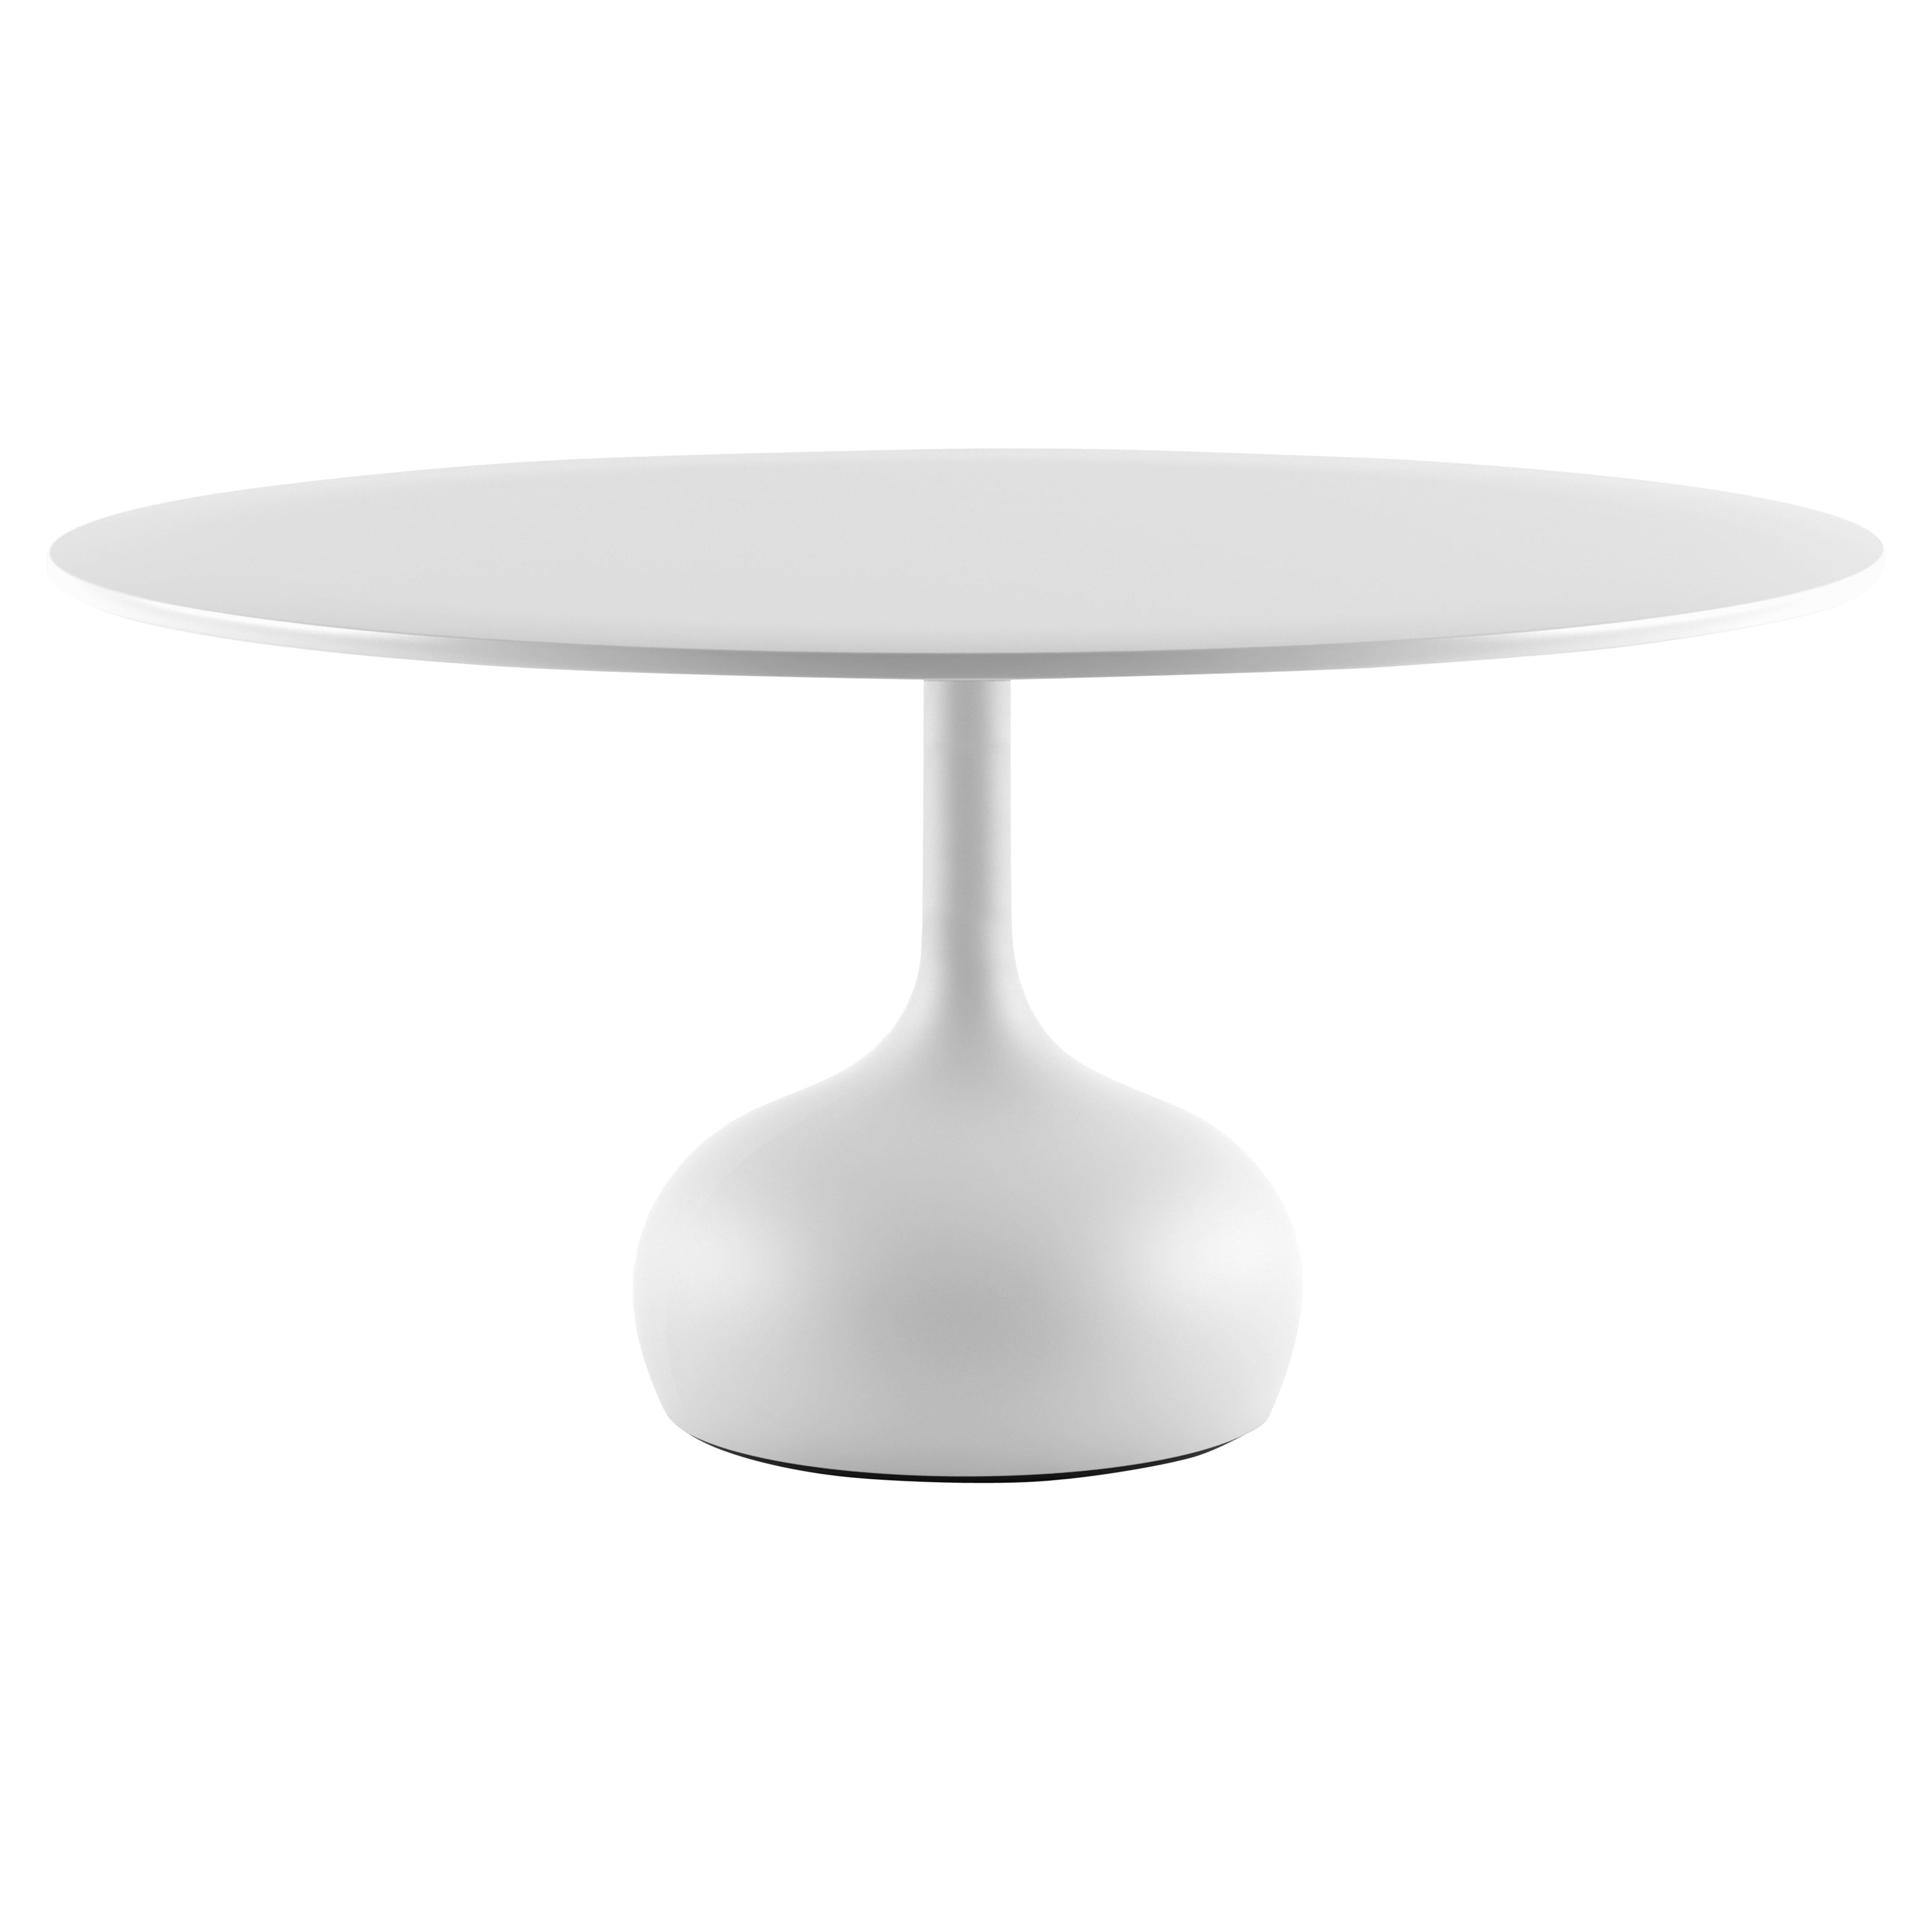 Alias 011 Saen Table Ø180 in White Lacquered MDF Top by Gabriele e Oscar Buratti For Sale